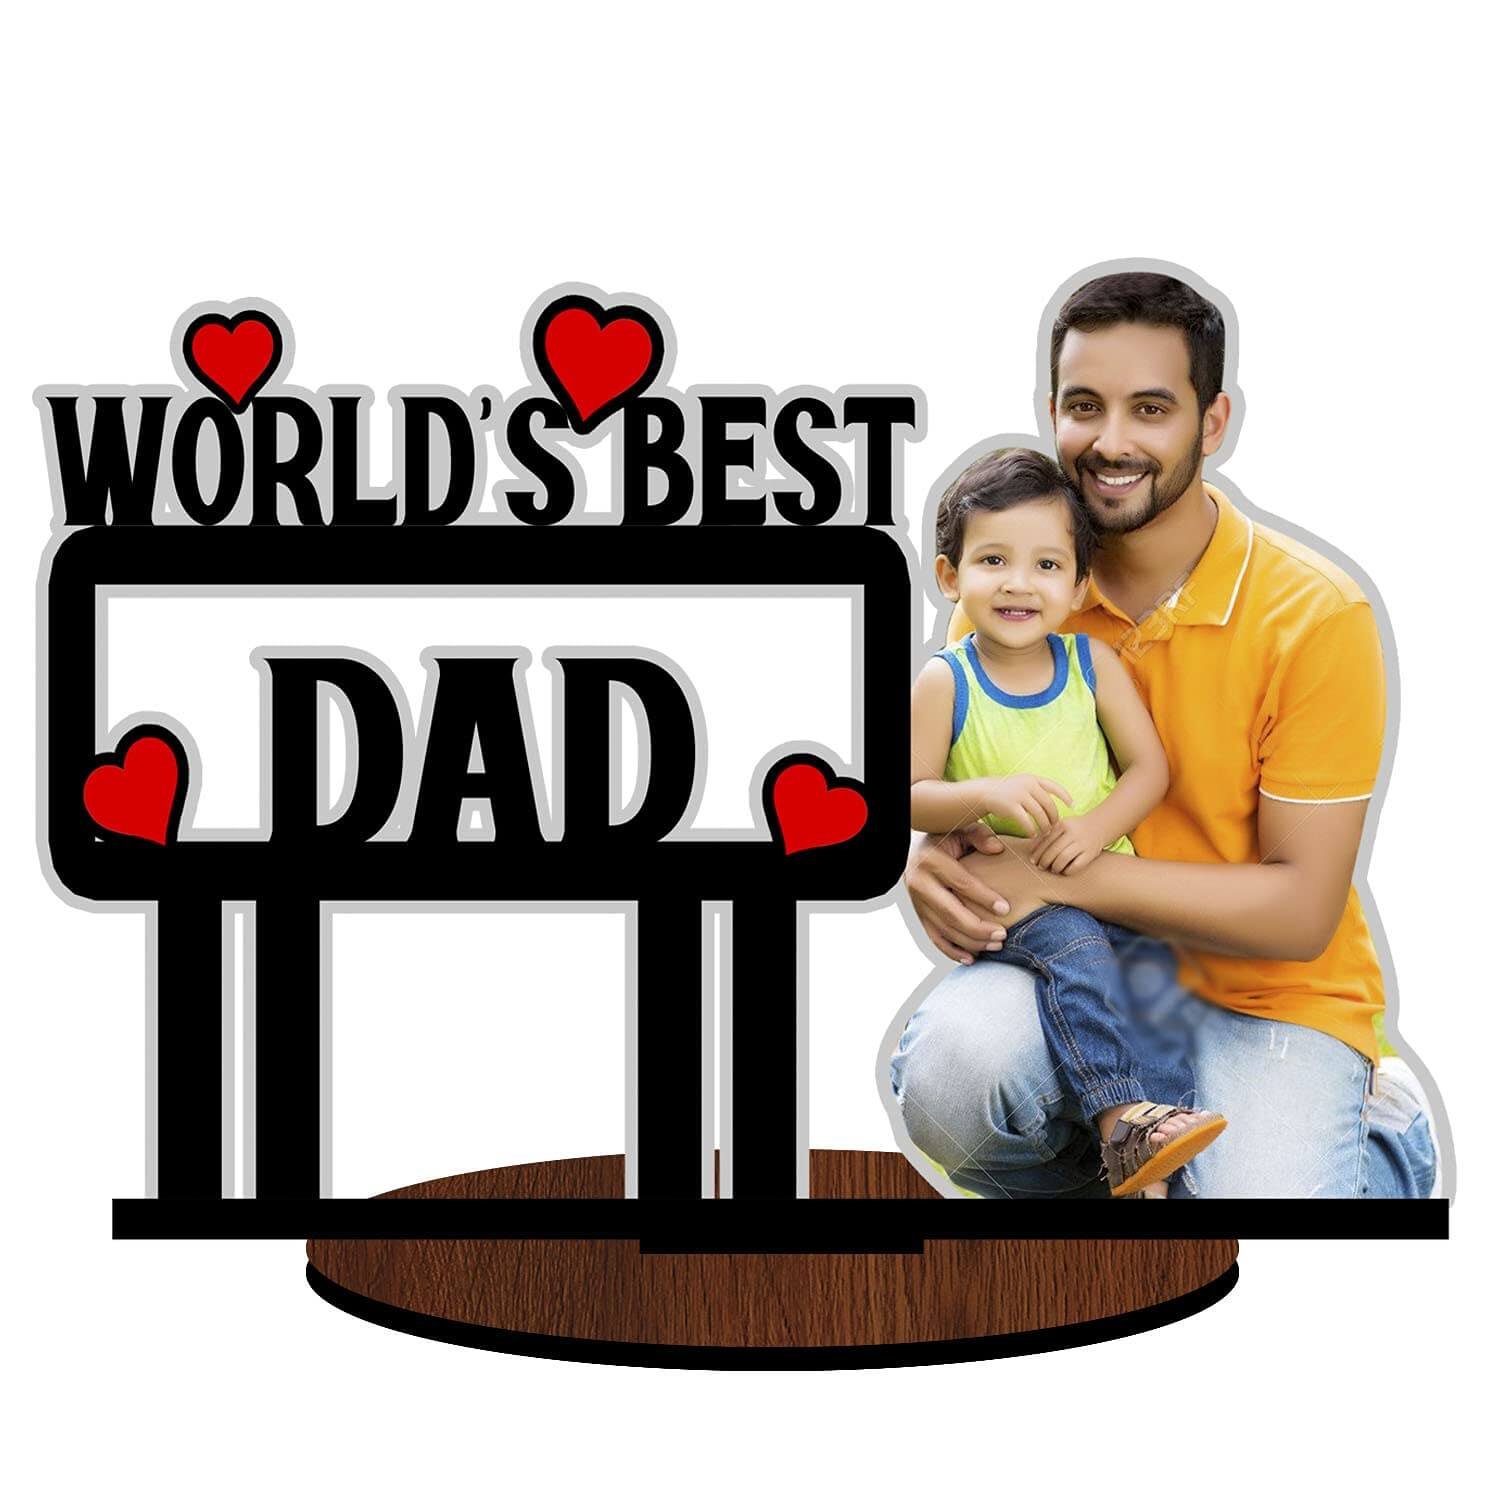 World's Best Dad Wood Photo Frame Personalized Caricature Gift Customized with your Photos (8 x 12 inches)